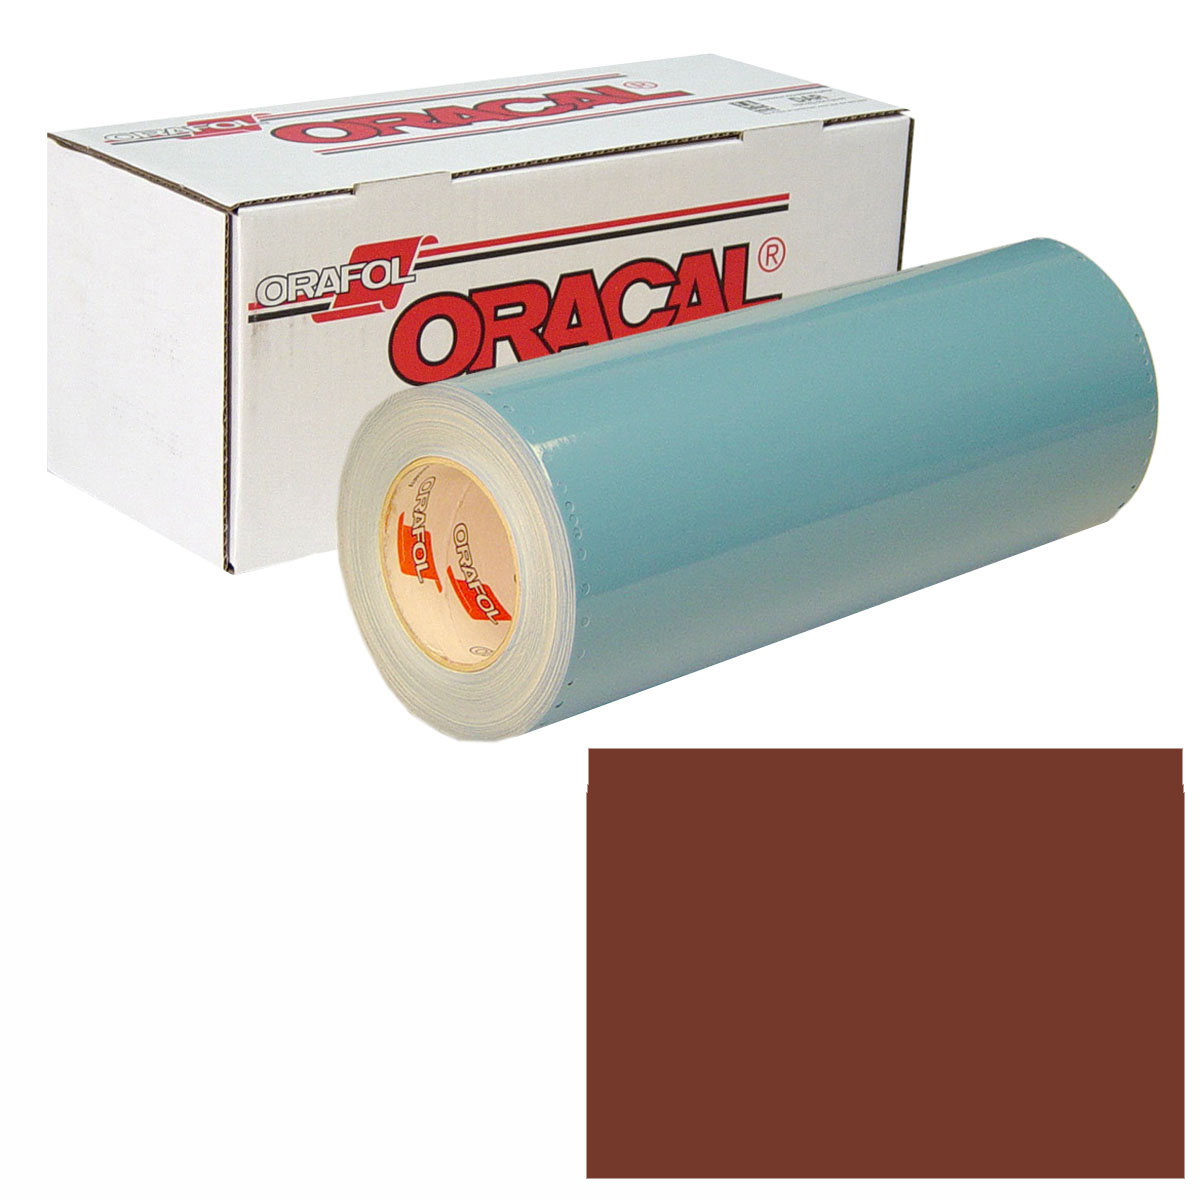 ORACAL 751 30in X 10yd 079 Red Brown